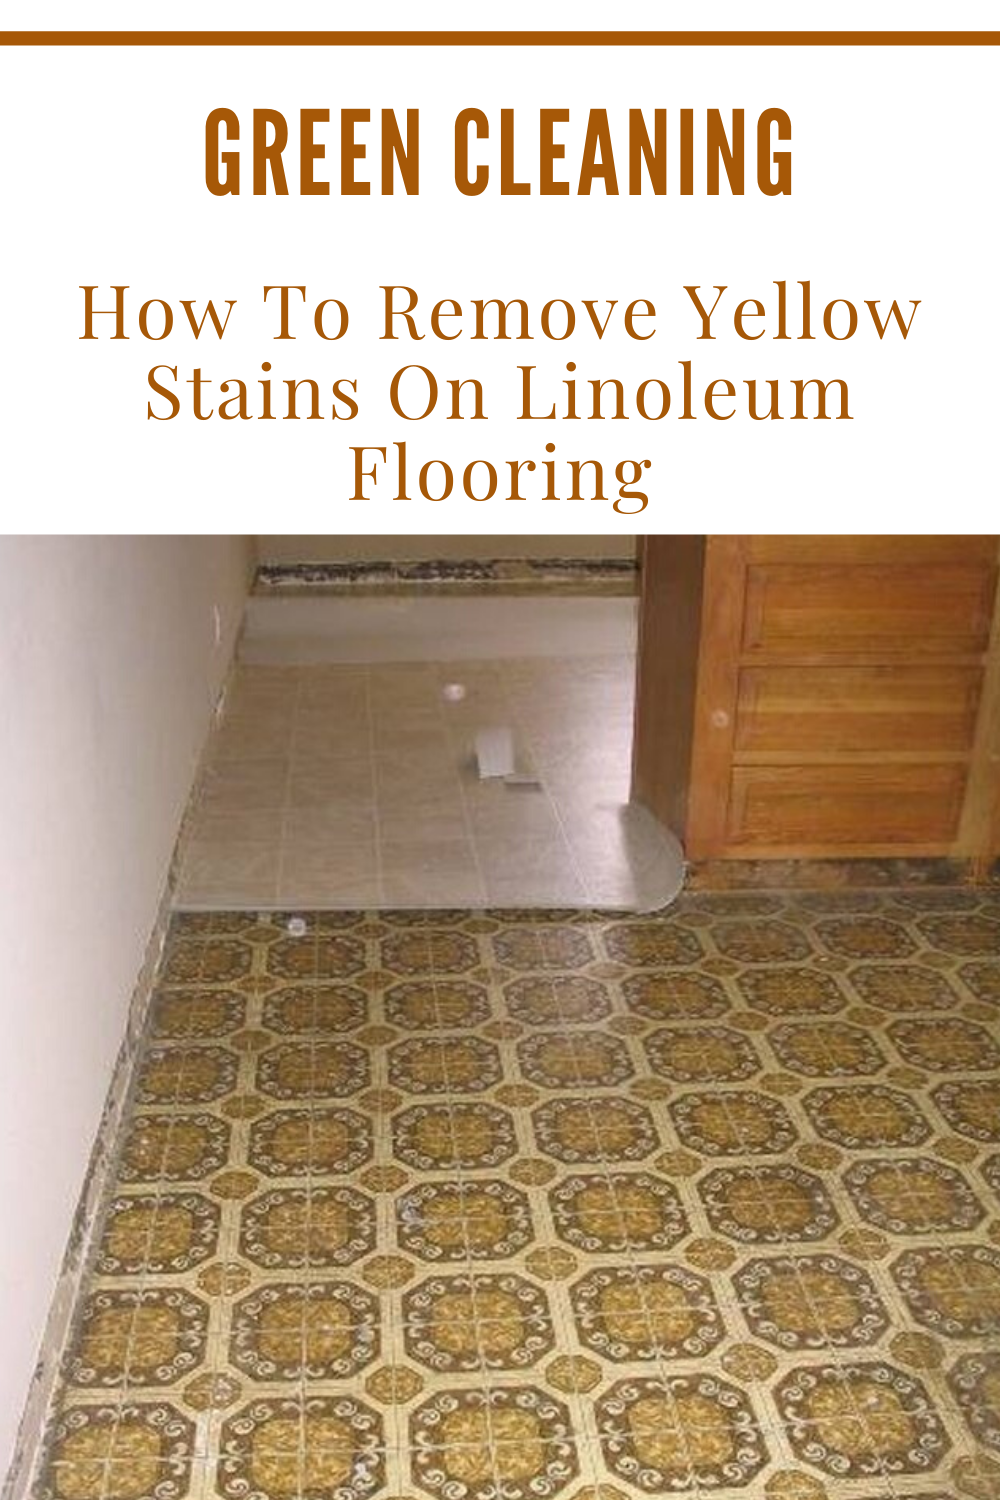 How To Remove Yellow Stains On Linoleum, How To Remove Yellow Discoloration On Vinyl Floor